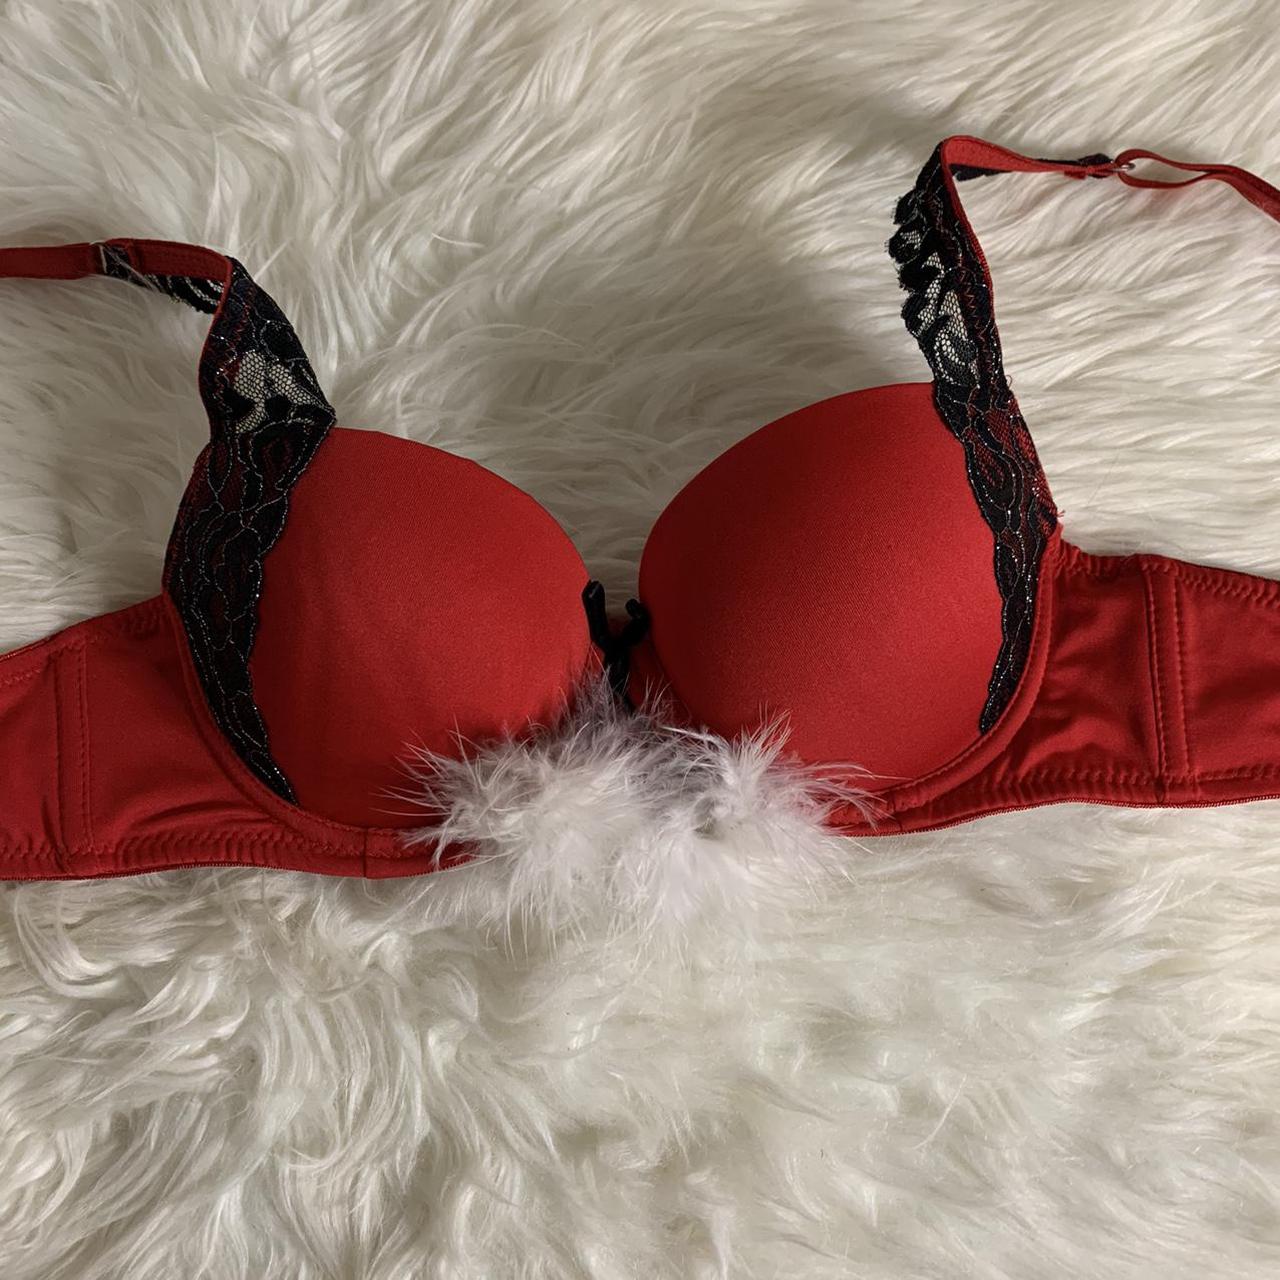 Red & black push up bra with white fuzzy balls This - Depop